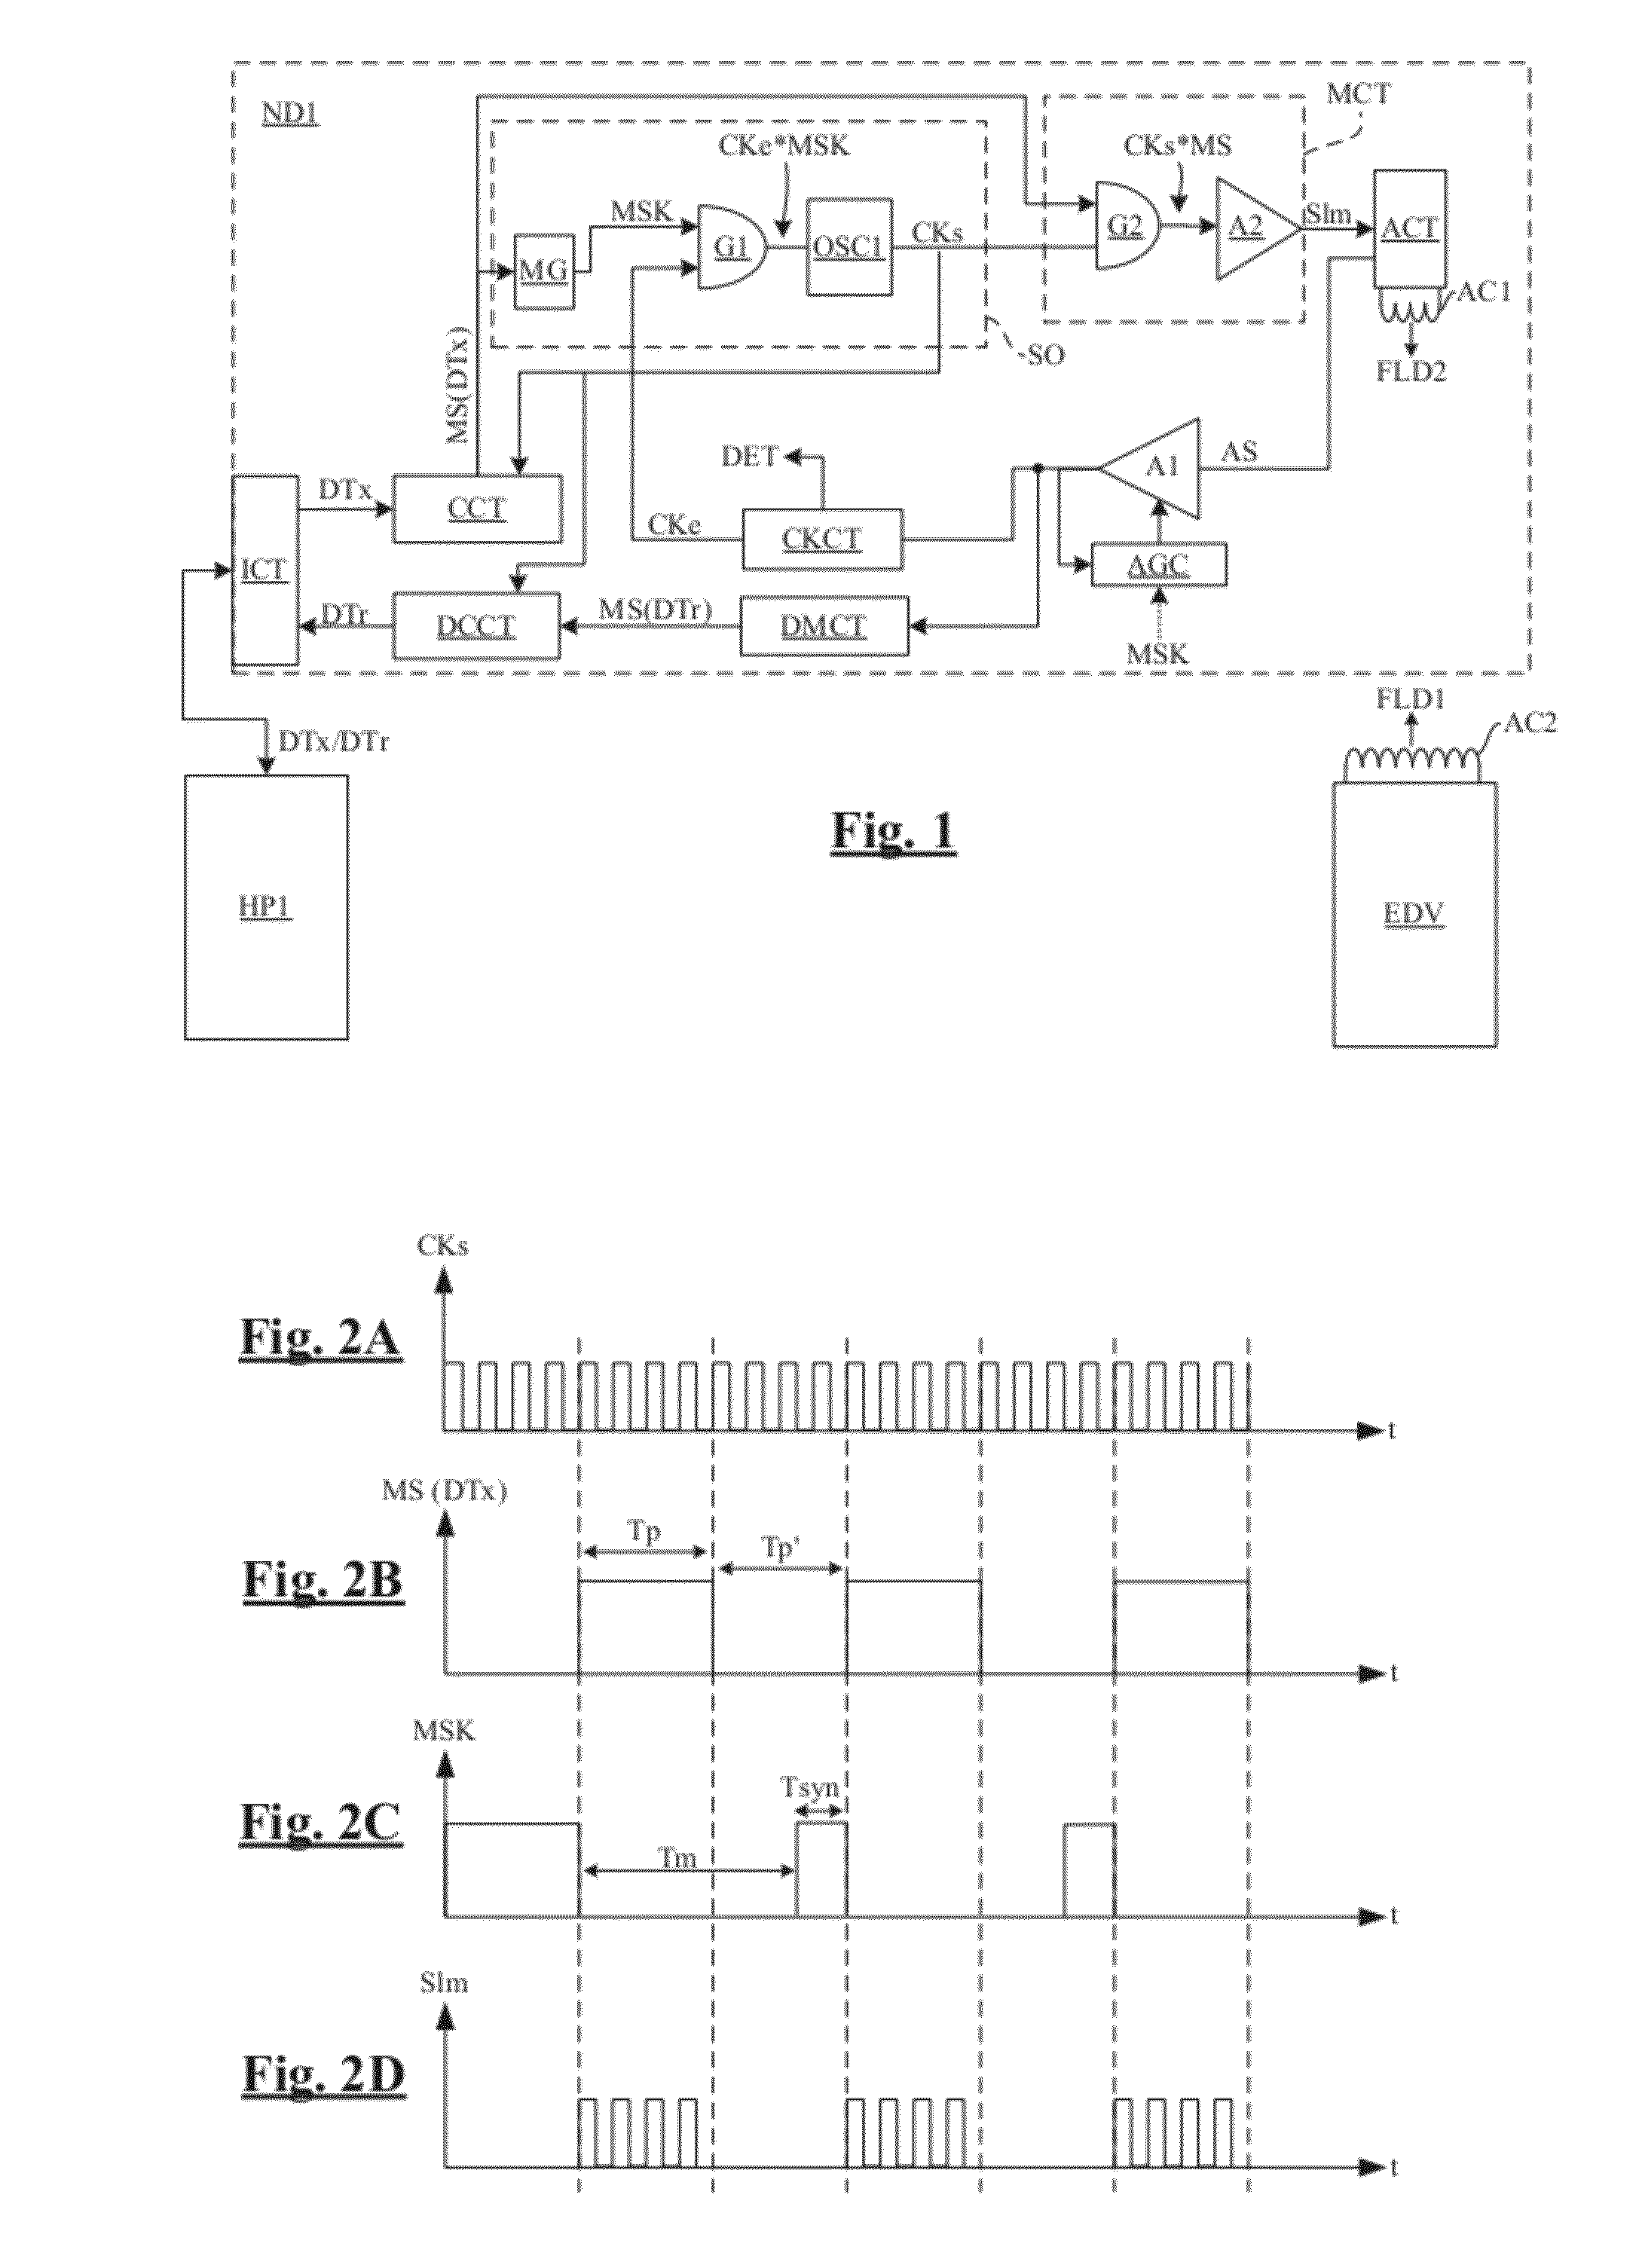 Method and Device for Active Load Modulation by Inductive Coupling